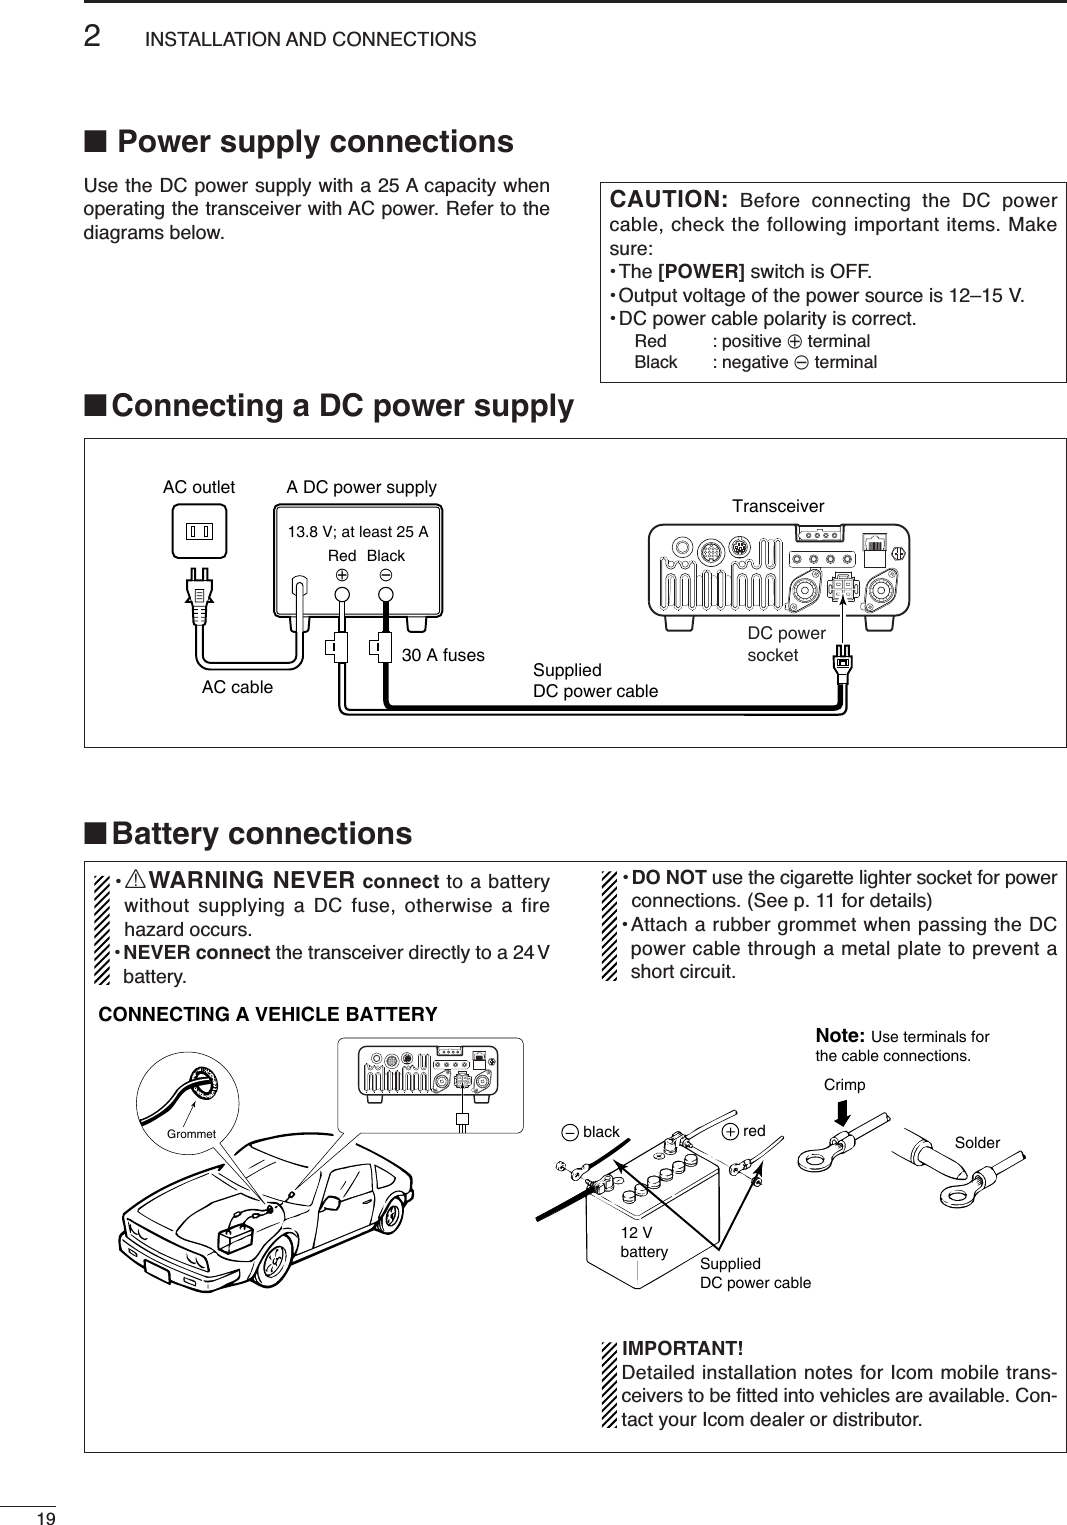 192INSTALLATION AND CONNECTIONS■Power supply connectionsUse the DC power supply with a 25 A capacity whenoperating the transceiver with AC power. Refer to thediagrams below.CAUTION: Before connecting the DC powercable, check the following important items. Makesure:•The [POWER] switch is OFF.•Output voltage of the power source is 12–15 V.• DC power cable polarity is correct.Red : positive +terminalBlack : negative _terminalA DC power supplyAC outletAC cable30 A fuses SuppliedDC power cable13.8 V; at least 25 ABlack_Red+TransceiverDC powersocket■Battery connections•RWARNING NEVER connect to a batterywithout supplying a DC fuse, otherwise a firehazard occurs.•NEVER connect the transceiver directly to a 24 Vbattery.•DO NOT use the cigarette lighter socket for powerconnections. (See p. 11 for details)•Attach a rubber grommet when passing the DCpower cable through a metal plate to prevent ashort circuit.IMPORTANT!Detailed installation notes for Icom mobile trans-ceivers to be ﬁtted into vehicles are available. Con-tact your Icom dealer or distributor.GrommetCONNECTING A VEHICLE BATTERYNote: Use terminals forthe cable connections.CrimpSolderSuppliedDC power cableredblack12 Vbattery■Connecting a DC power supply